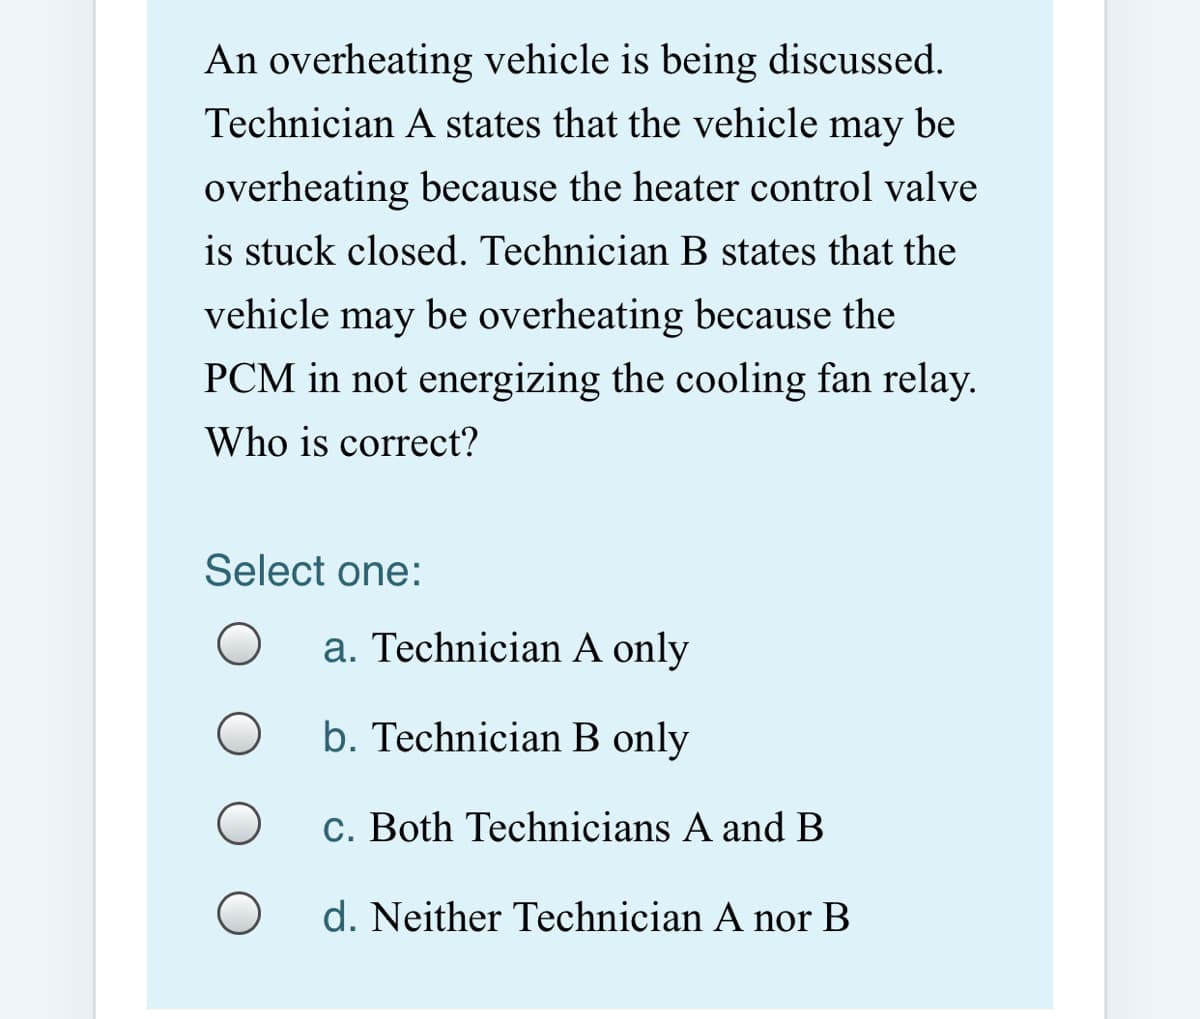 An overheating vehicle is being discussed.
Technician A states that the vehicle may be
overheating because the heater control valve
is stuck closed. Technician B states that the
vehicle may be overheating because the
PCM in not energizing the cooling fan relay.
Who is correct?
Select one:
a. Technician A only
b. Technician B only
c. Both Technicians A and B
d. Neither Technician A nor B
